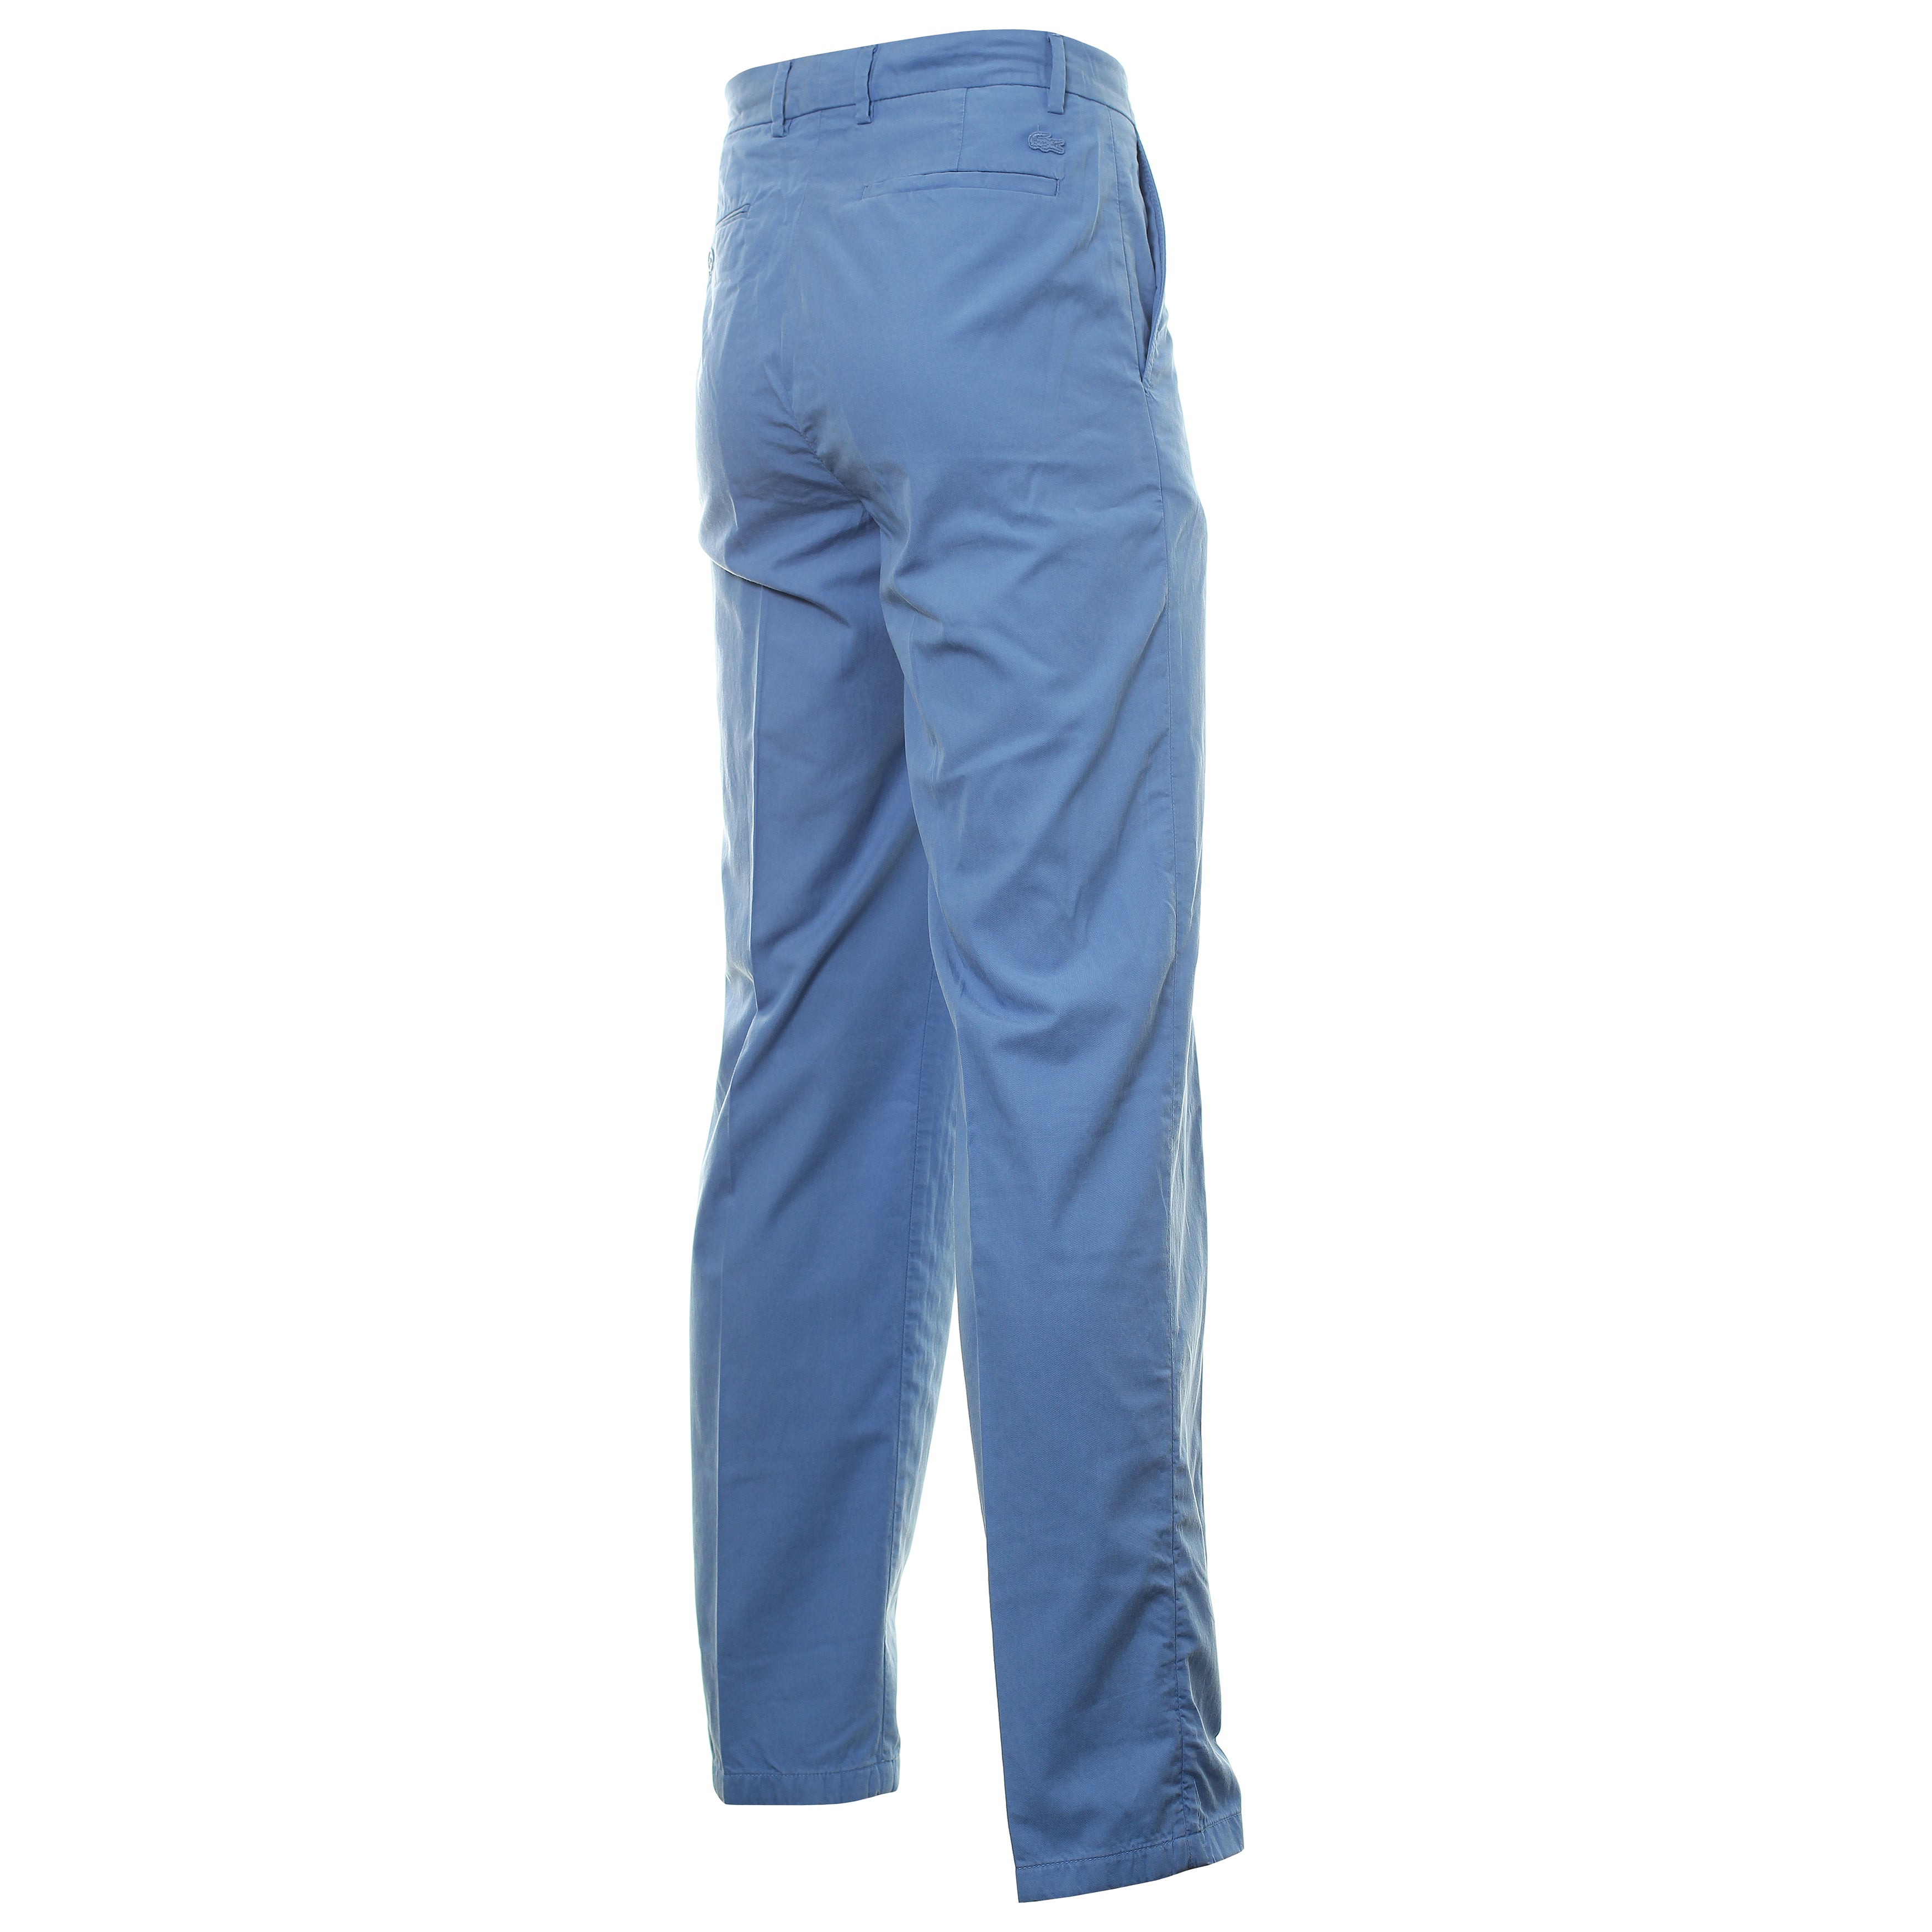 Lacoste Lightweight Chino Pants HH1053 Turquin Blue 776 | Function18 ...